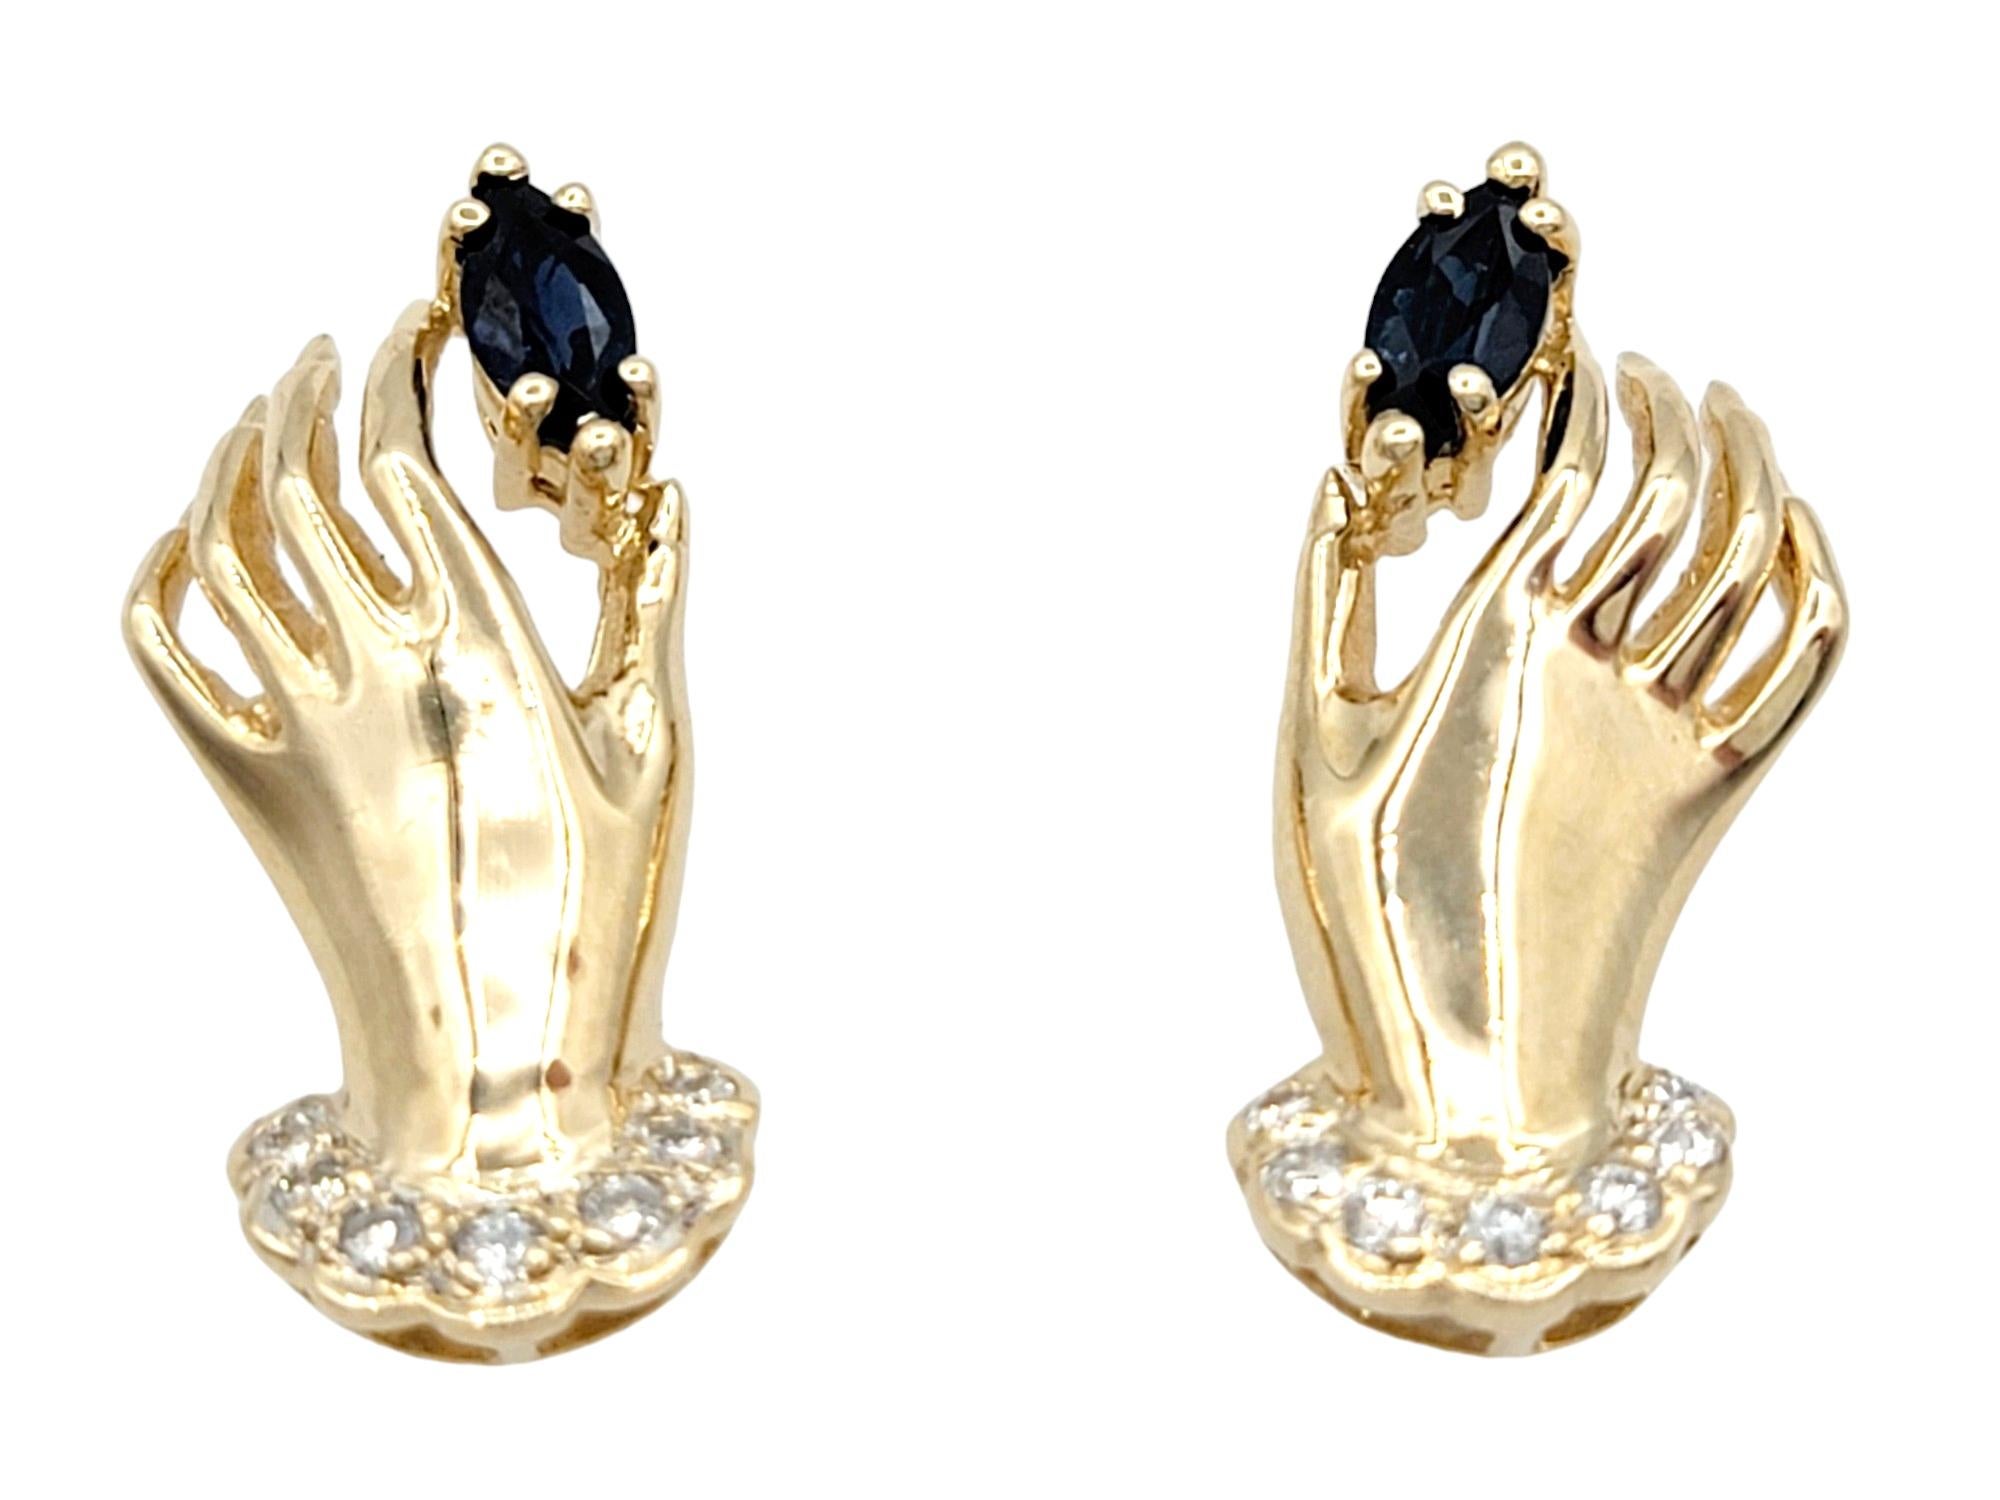 These distinctive stud earrings, shaped like hands and set in radiant 14 karat yellow gold, showcase a creative and meaningful design. Each hand delicately cradles a marquise-cut sapphire, adding a touch of color and elegance to the overall